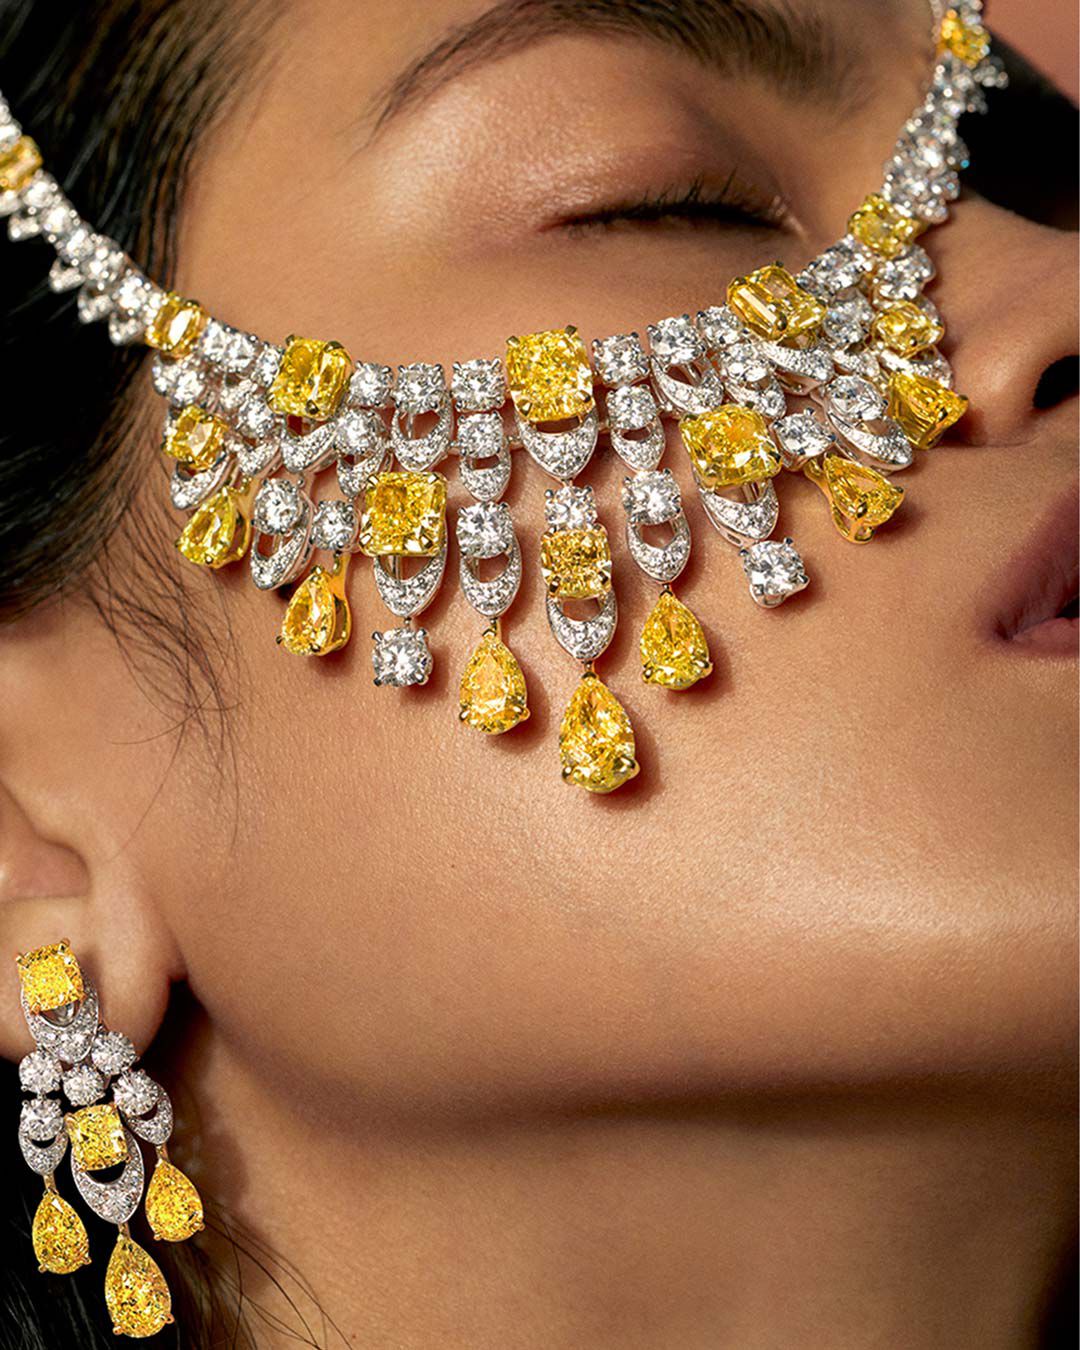 Model wears a Graff high jewellery yellow and white diamond necklace